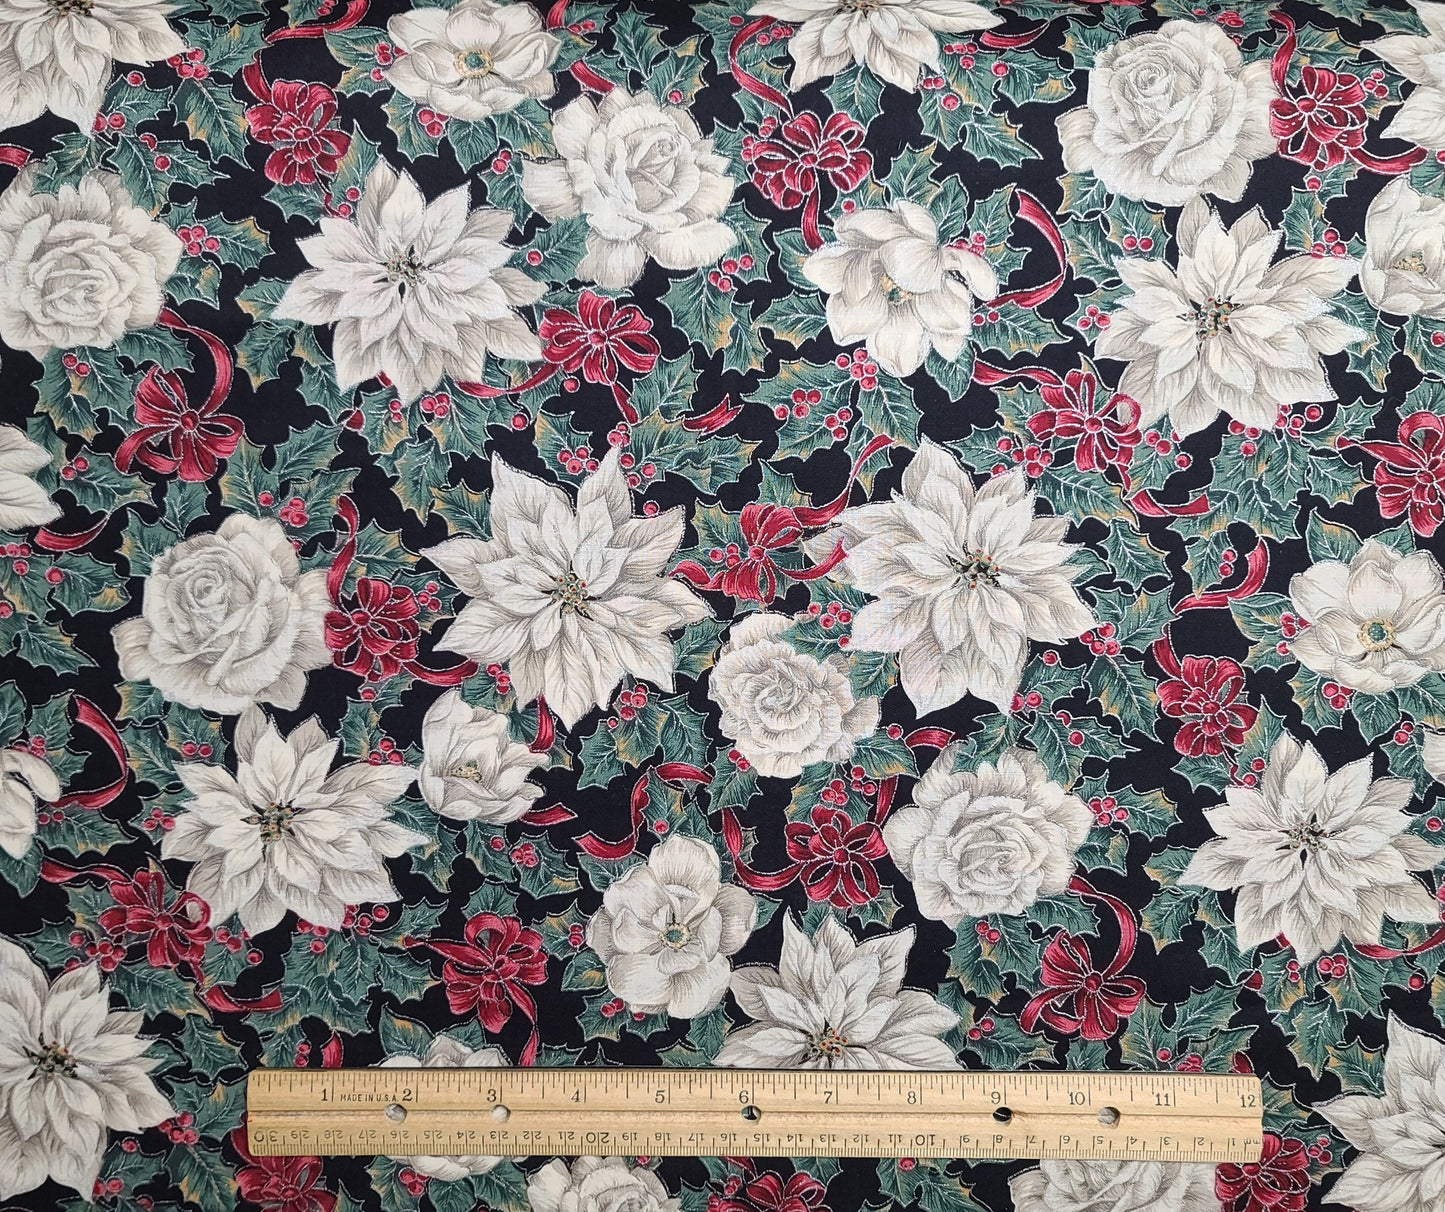 EOB - 58" WIDE Black Fabric / Red, White, Green Poinsettia, Rose, Ribbon Print / Silver Metallic Accents - Selvage to Selvage Print